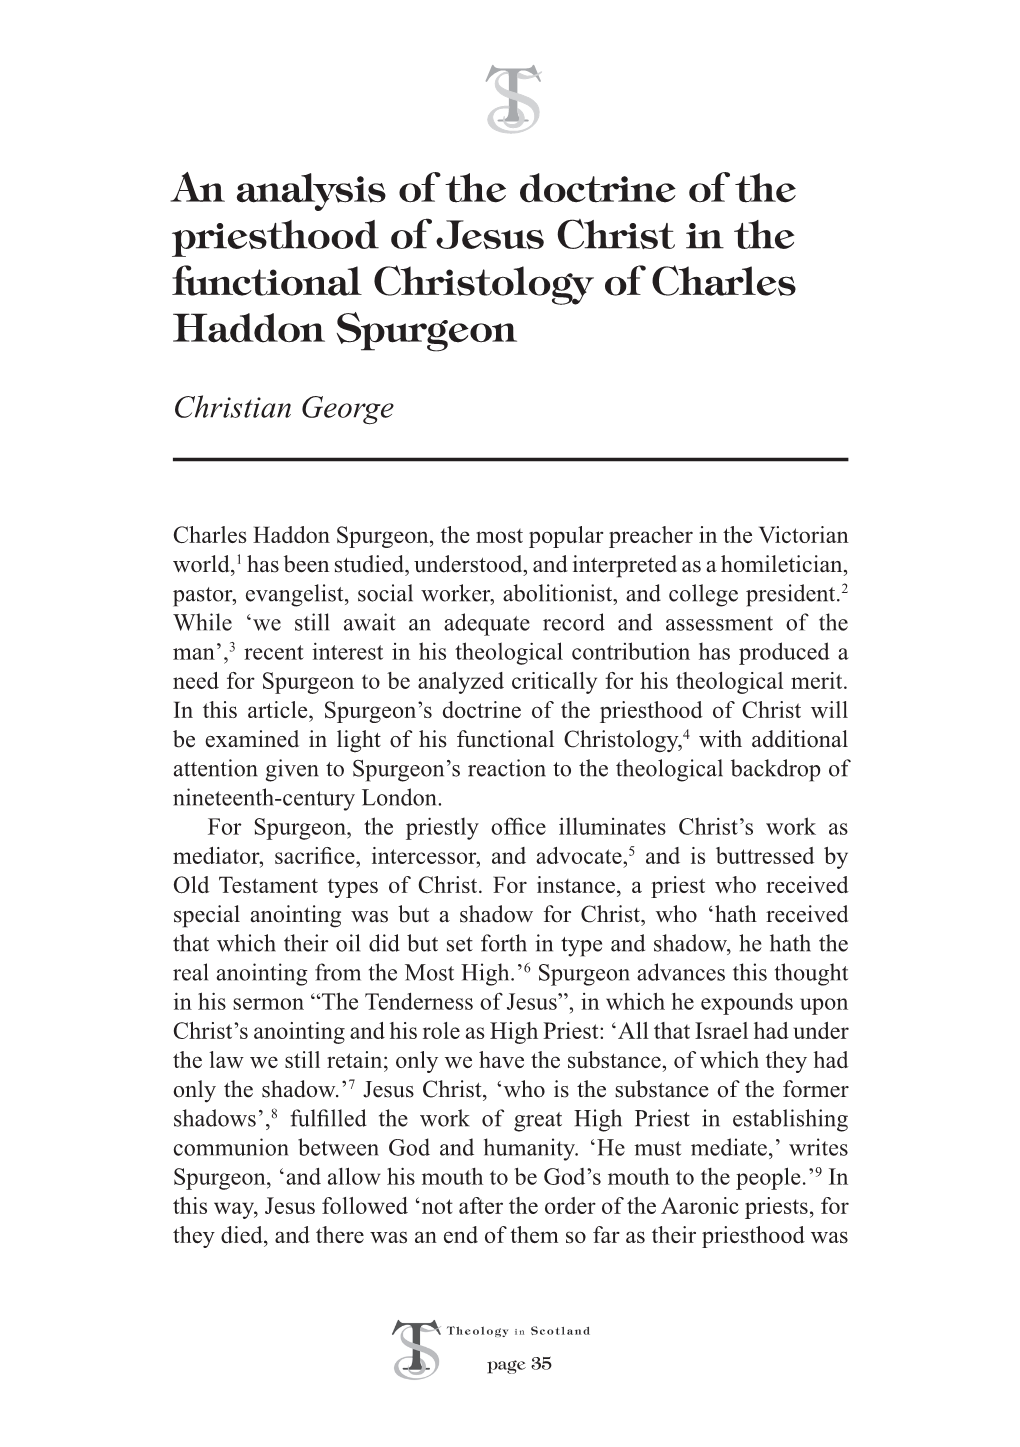 An Analysis of the Doctrine of the Priesthood of Jesus Christ in the Functional Christology of Charles Haddon Spurgeon